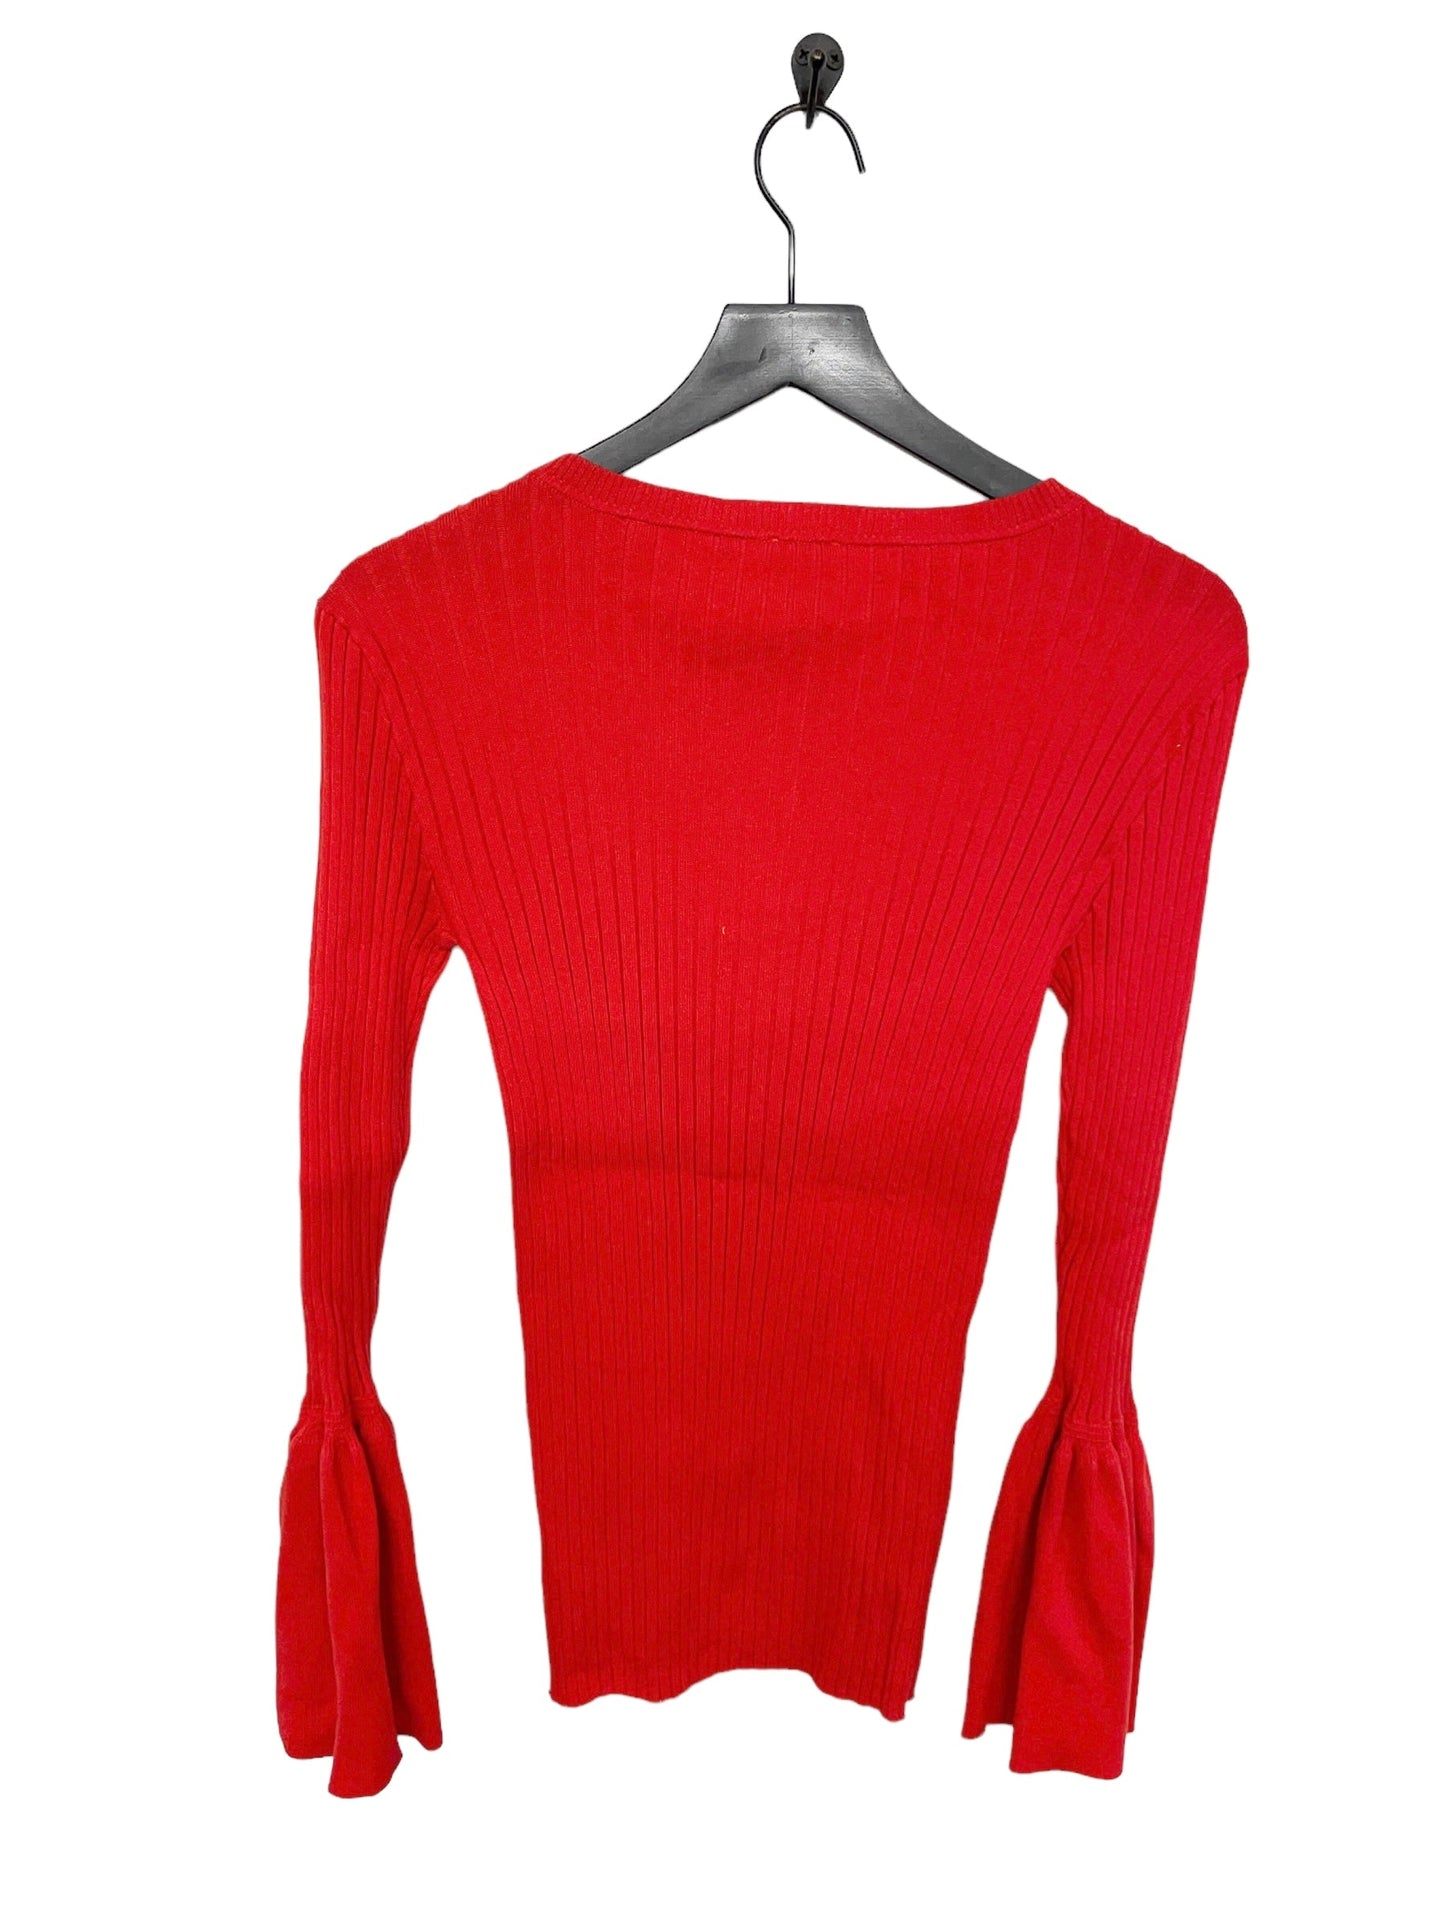 Red Top Long Sleeve Cabi, Size S